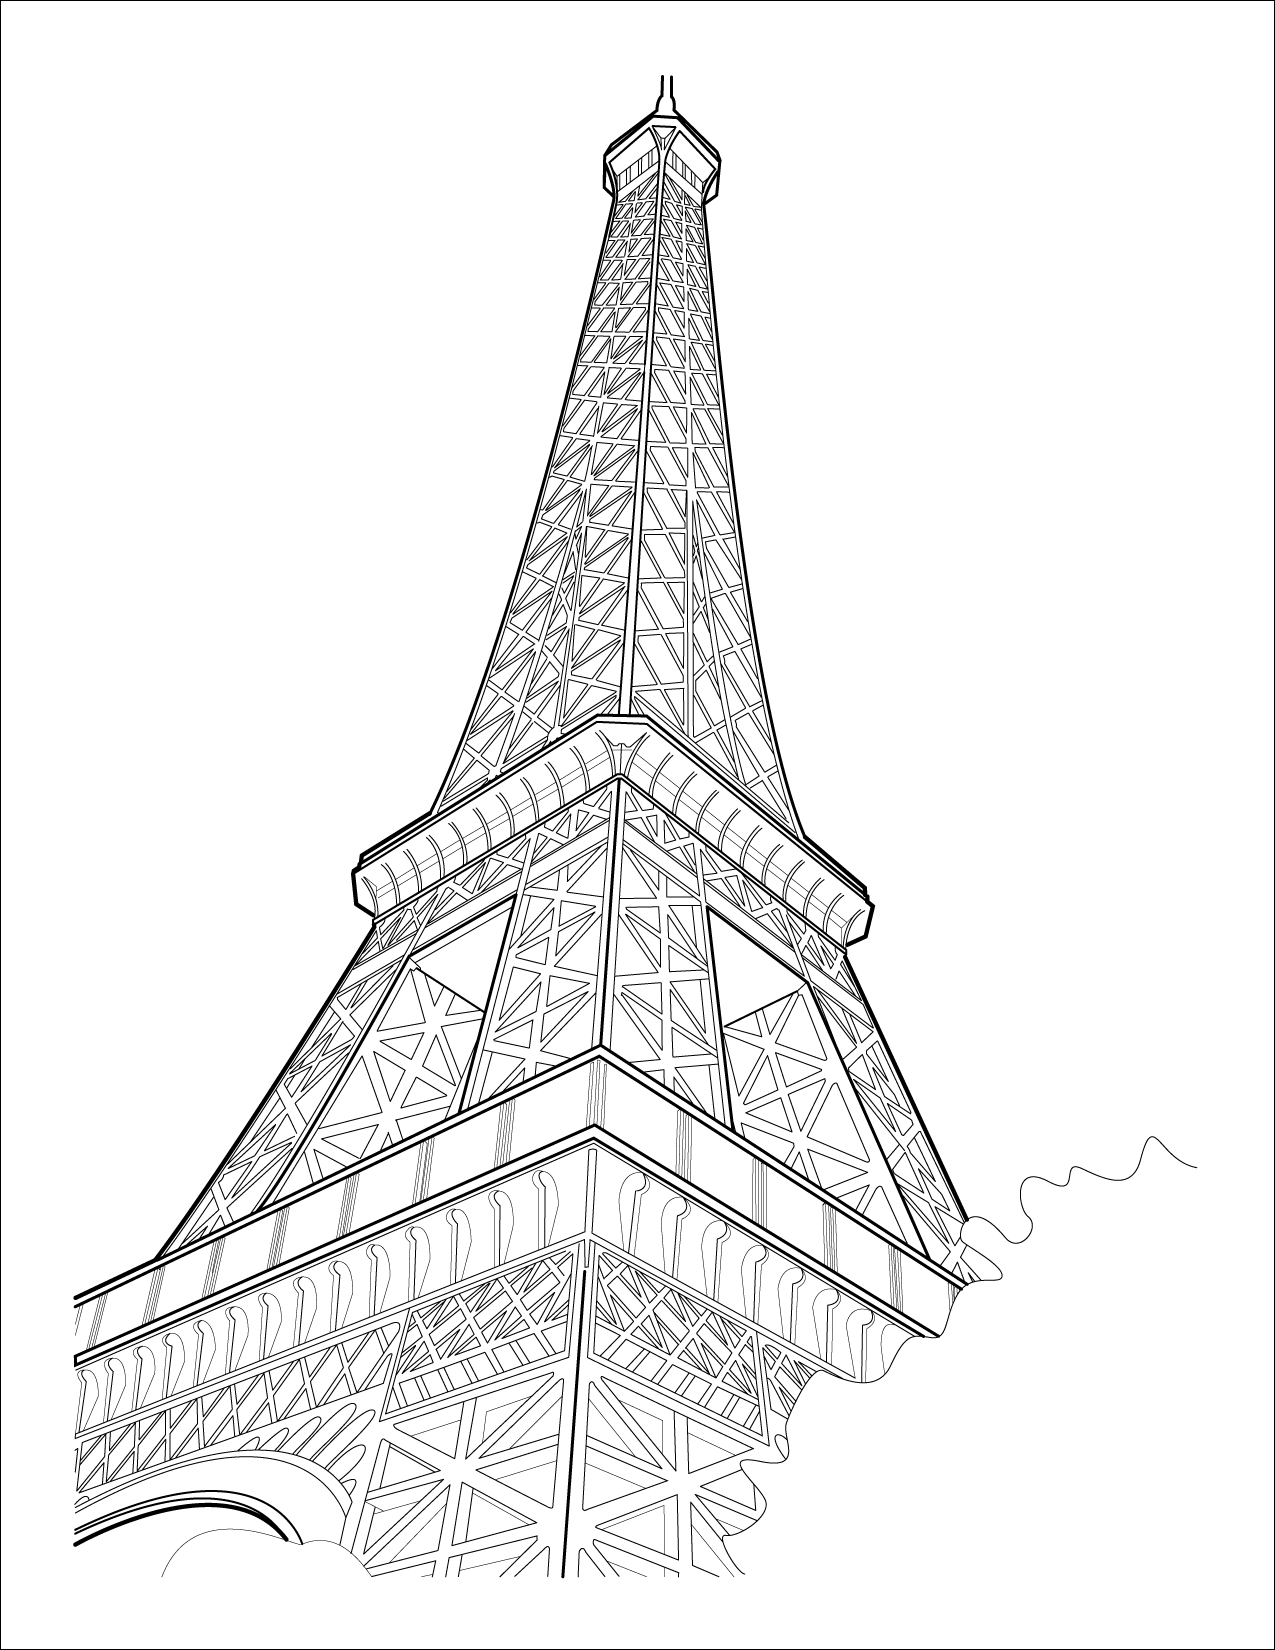 Eiffel Tower by kcbiehl on Clipart library